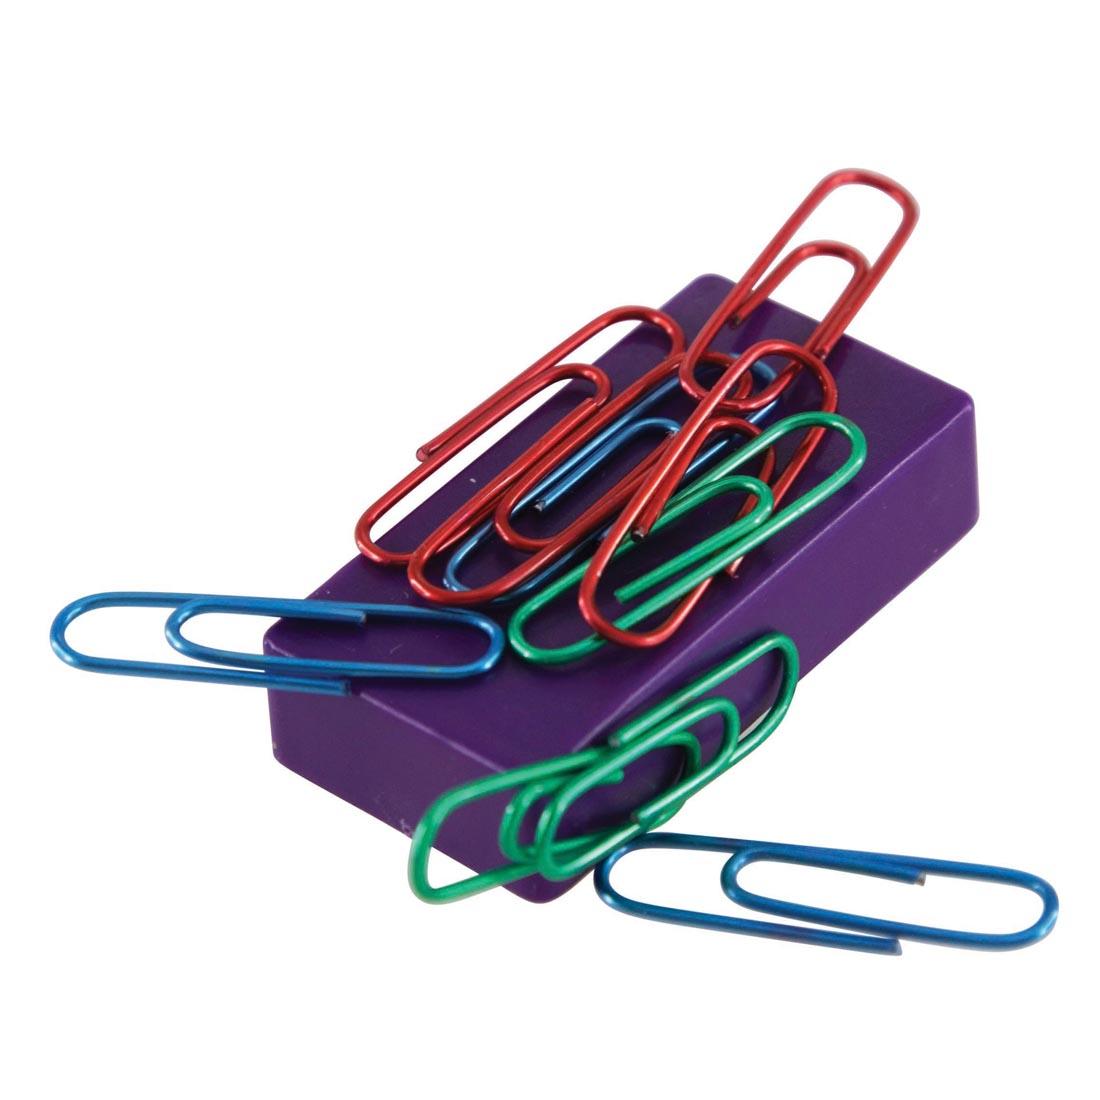 Rectangular Magnet shown with paper clips